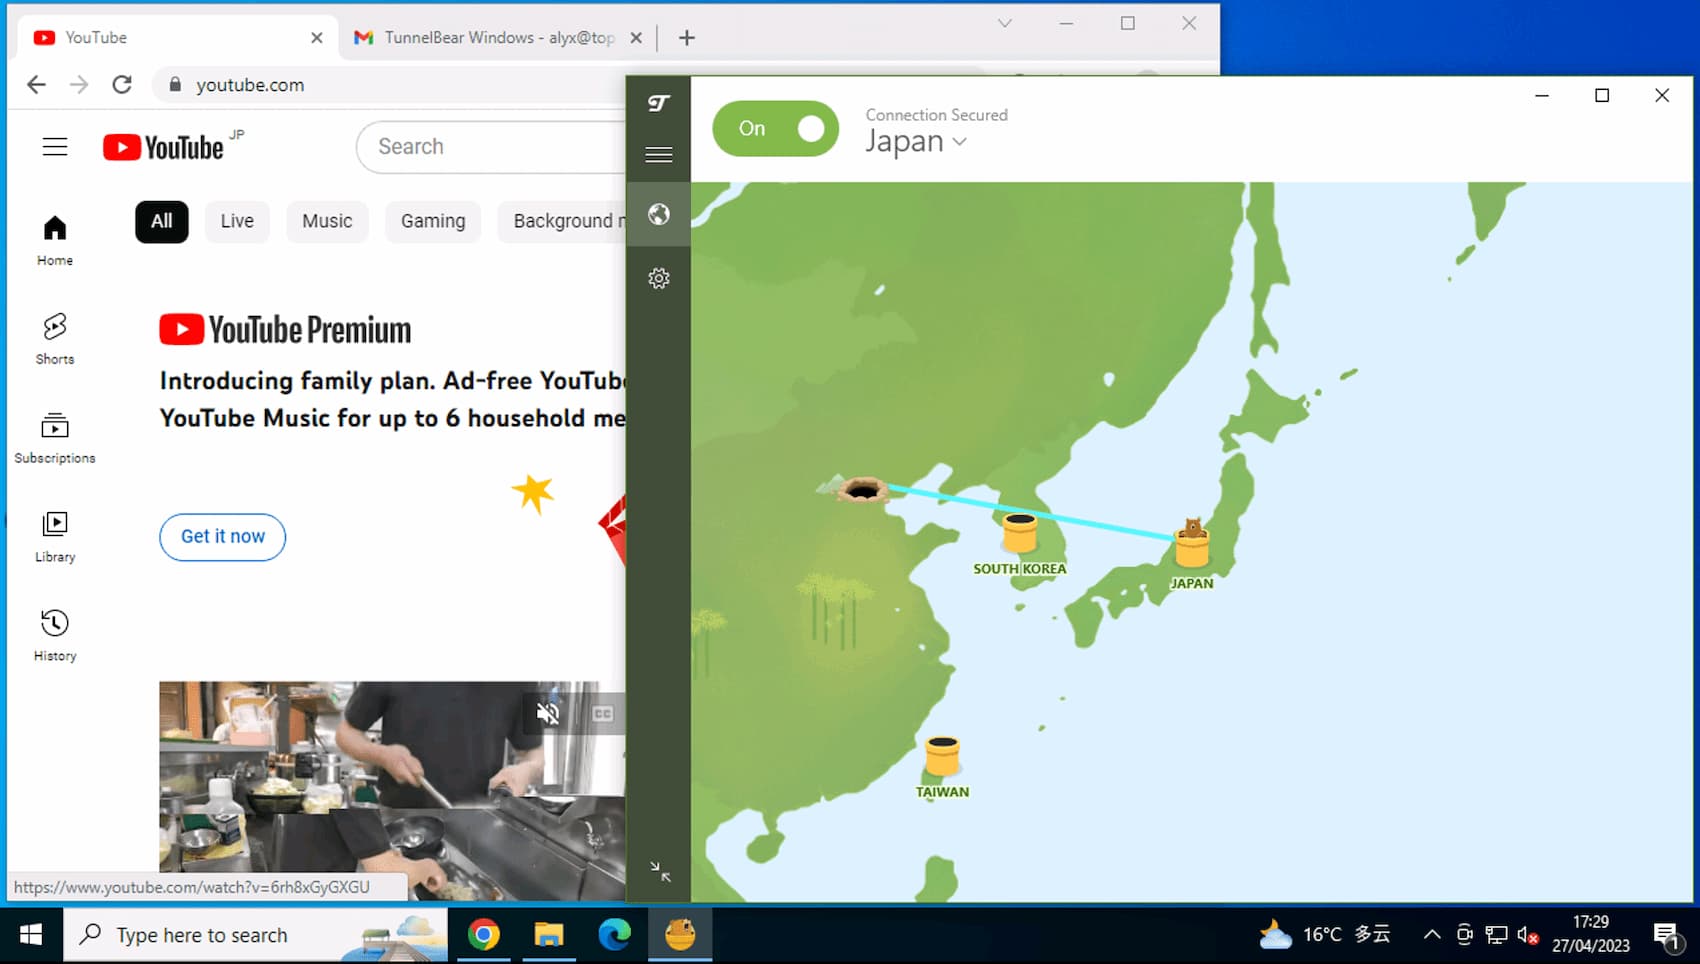 Our remote desktop in China shows TunnelBear bypassing the firewall to unblock YouTube while connected to a Japanese server.